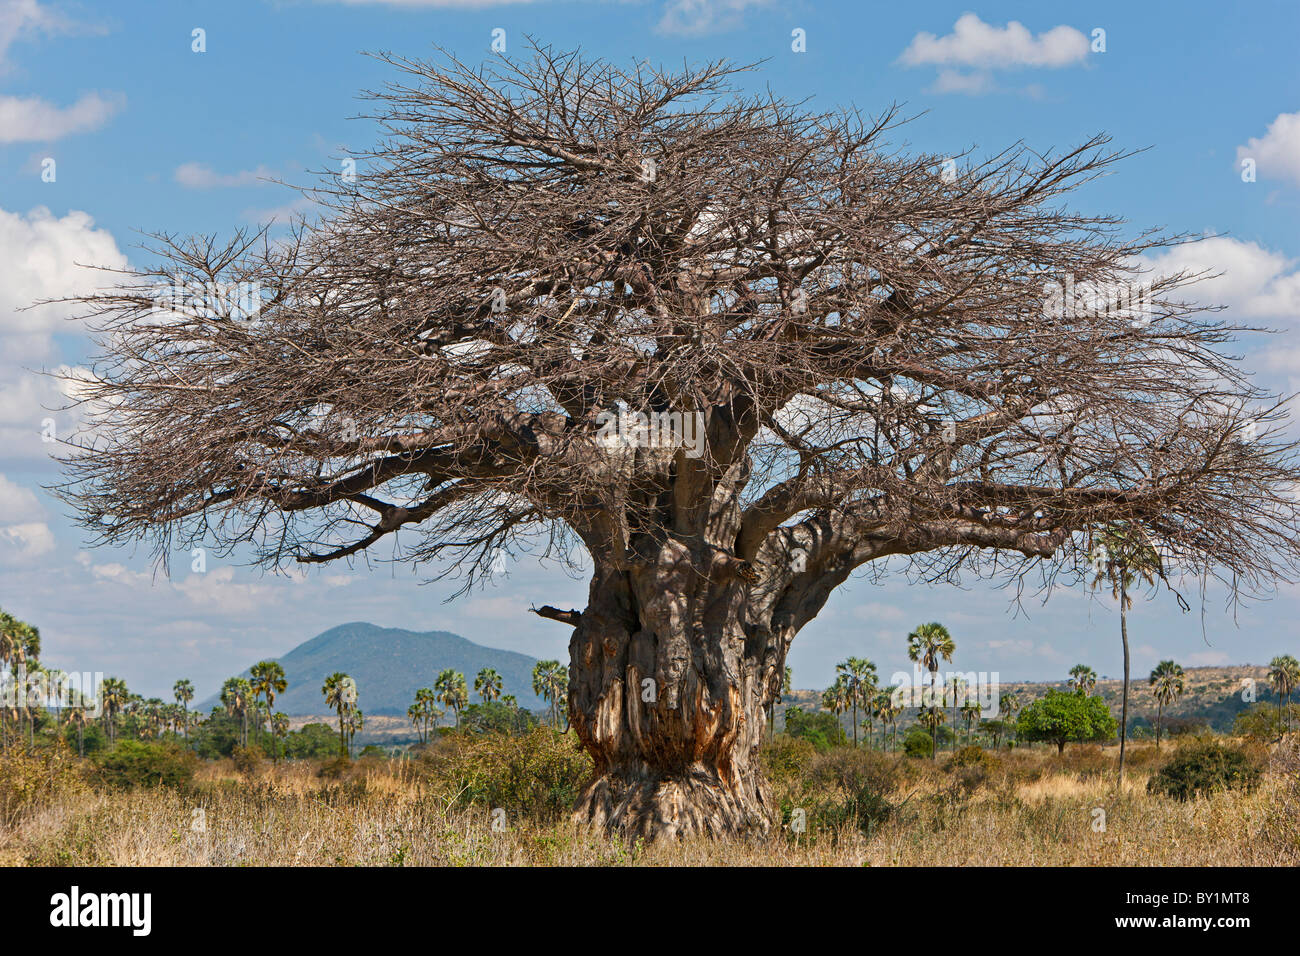 A large Baobab tree in Ruaha National Park.  Elephant damage to the bark of its trunk is very evident. Stock Photo